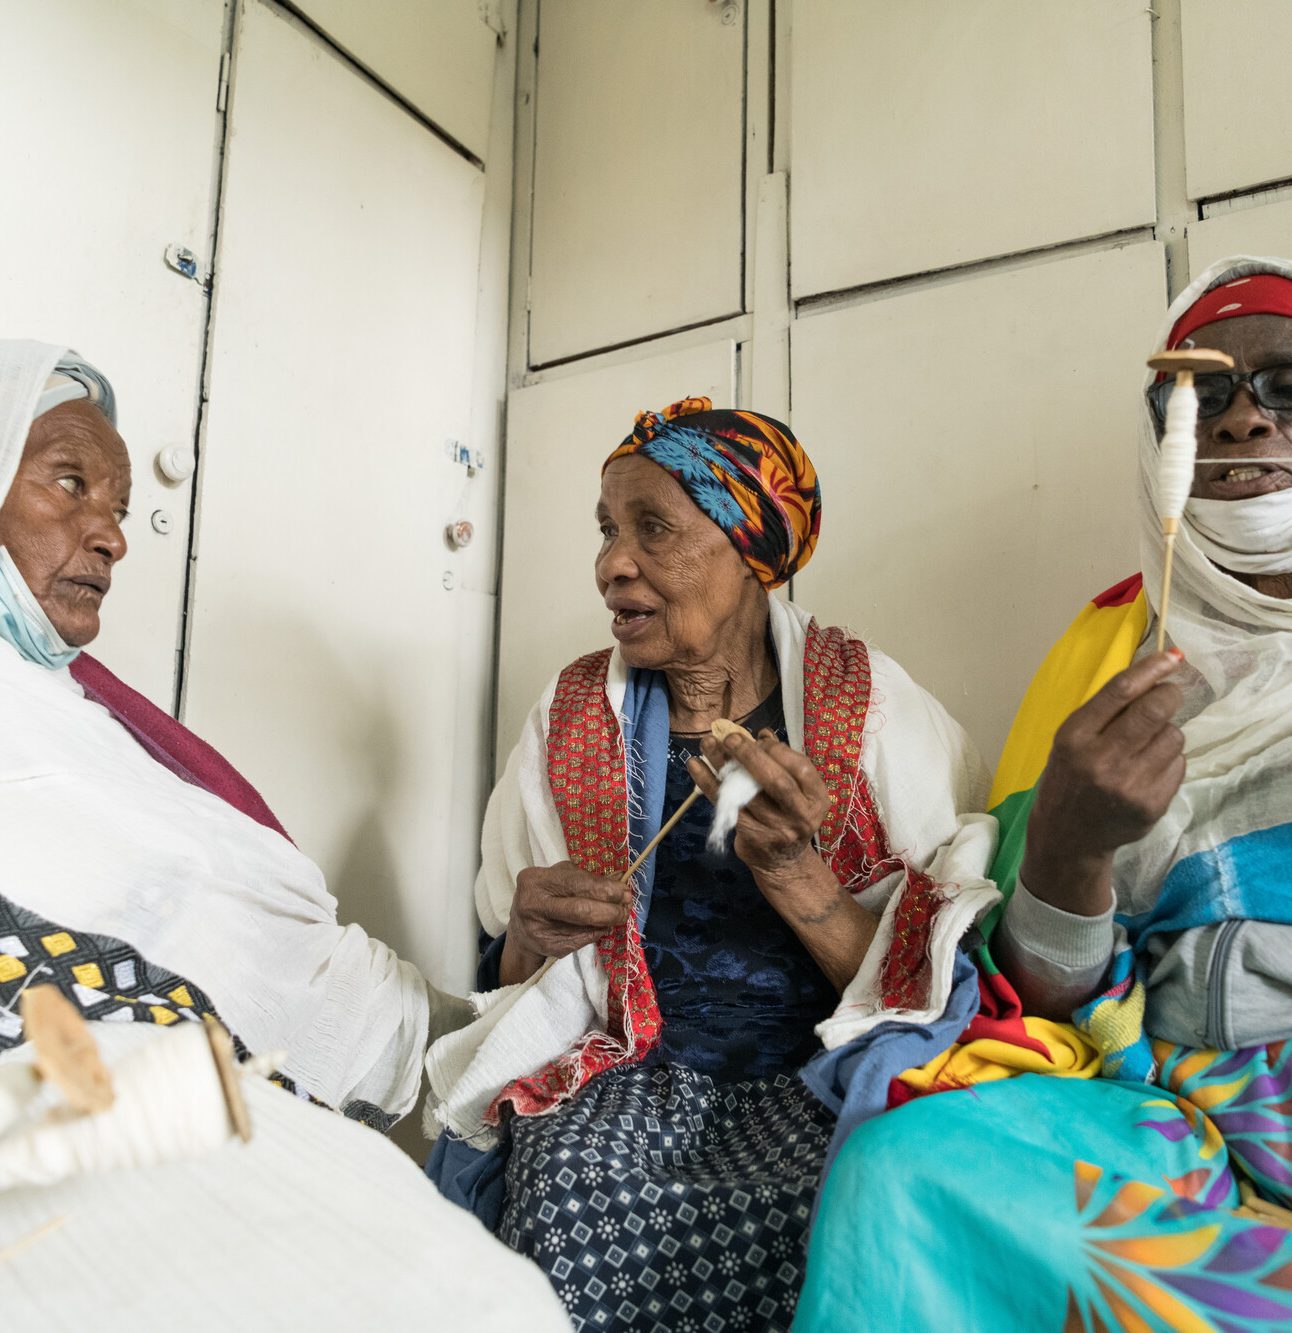 Here, from left to right Kelemuwa Tekle,76, Aselefech Zeleke and Yimenashu Eondemiyihun,68, all members of Eneredada Elder People Association are seen spinning cotton at the association's office in Addis Ababa, Ethiopia.